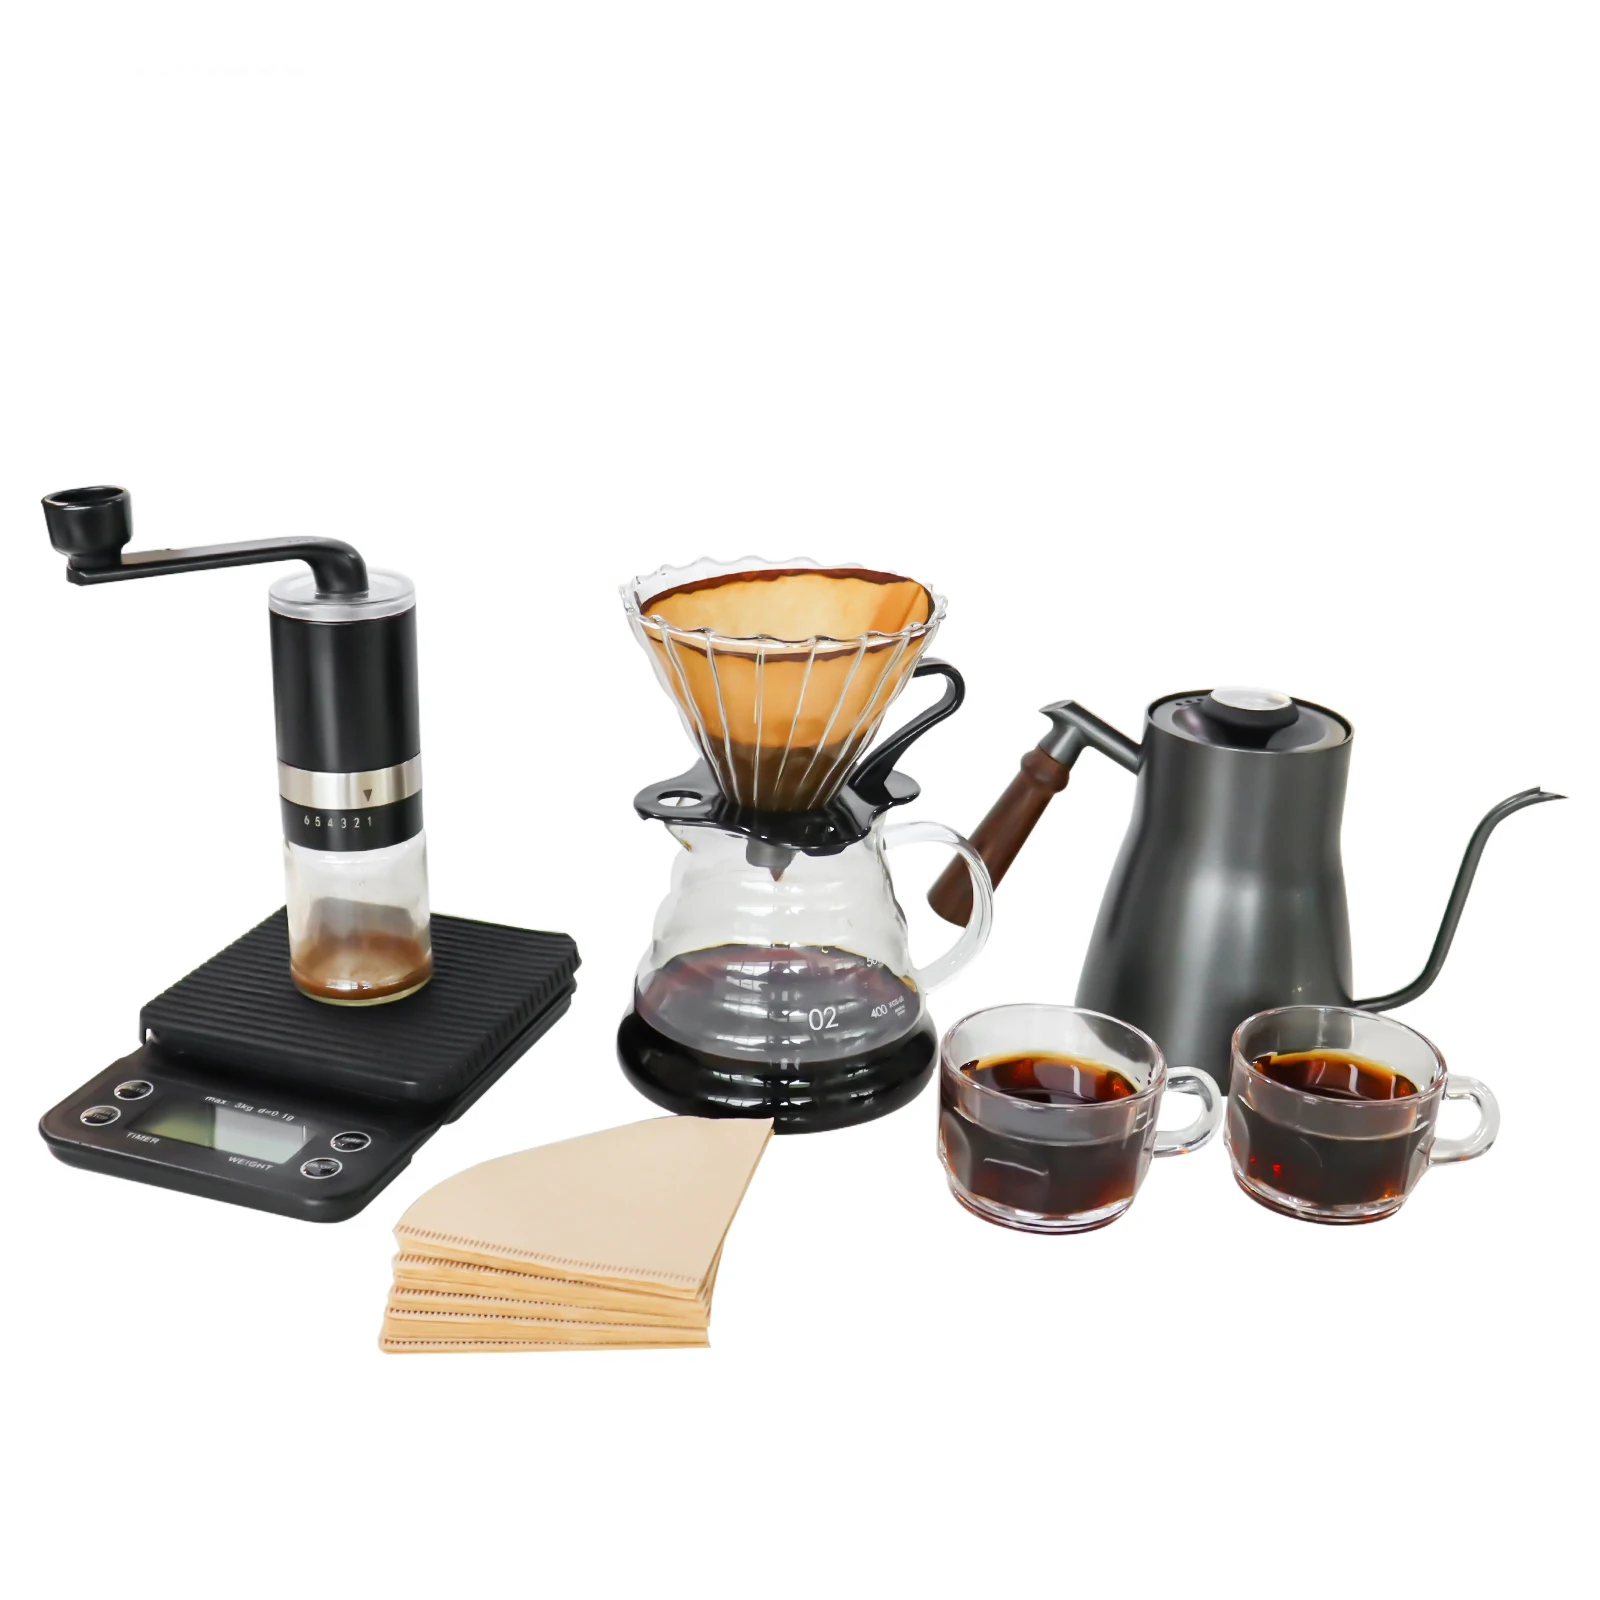 https://ae01.alicdn.com/kf/S5325dad28d7c4eff9feff1ff8703bb85M/Coffee-Maker-Set-Portable-Outdoor-Travel-Gift-Box-with-Pour-Over-Coffee-Kettle-Coffee-Grinder-Cup.jpg